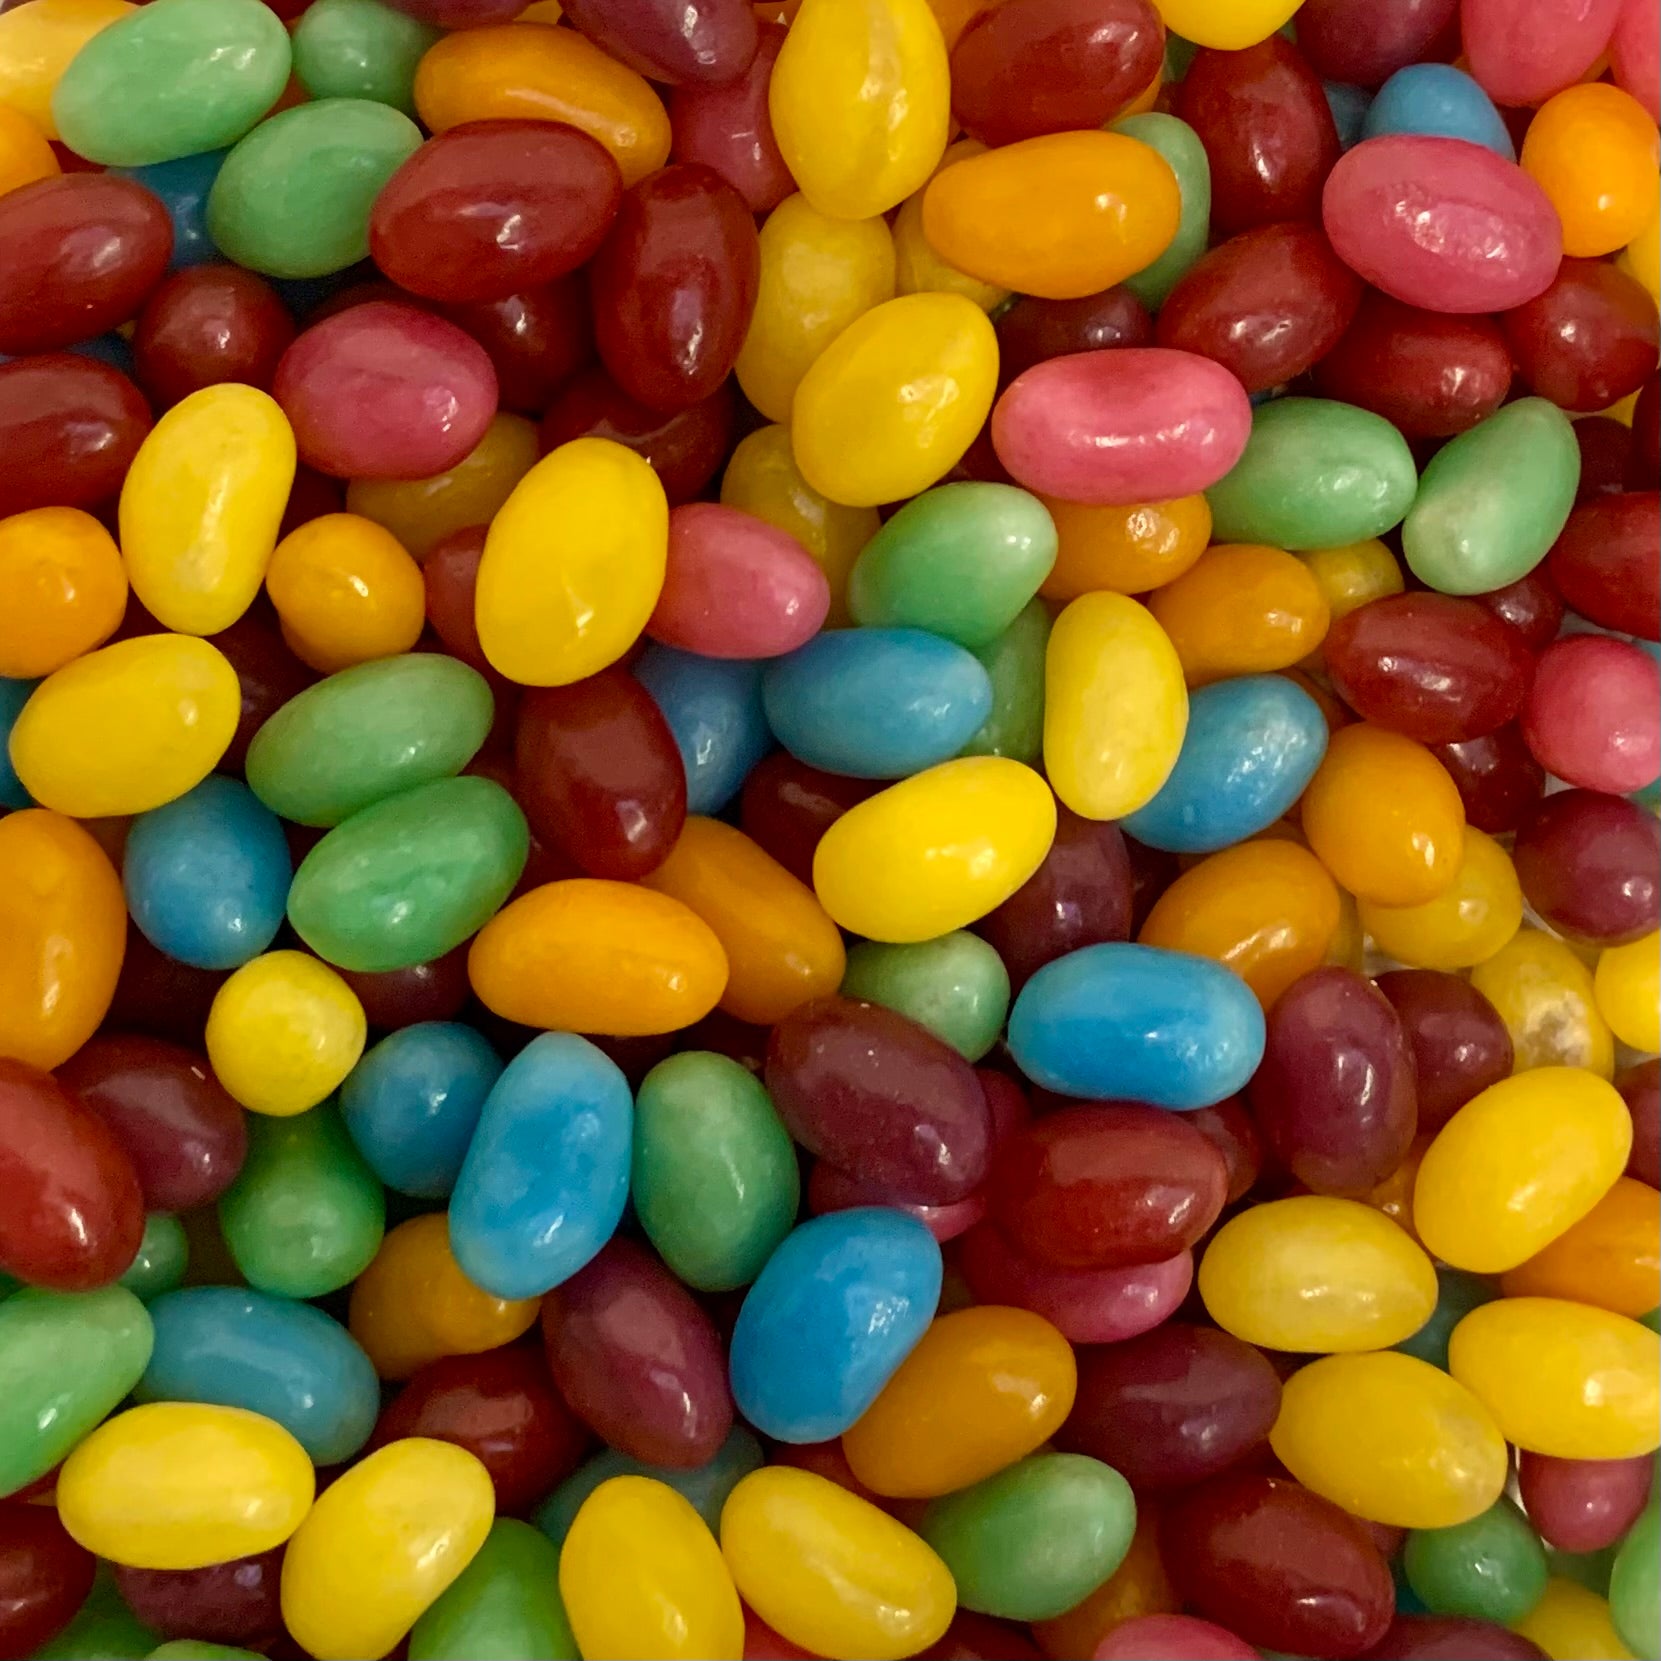 Sour Jumbo Jelly Beans – The Gourmet Sweet Company